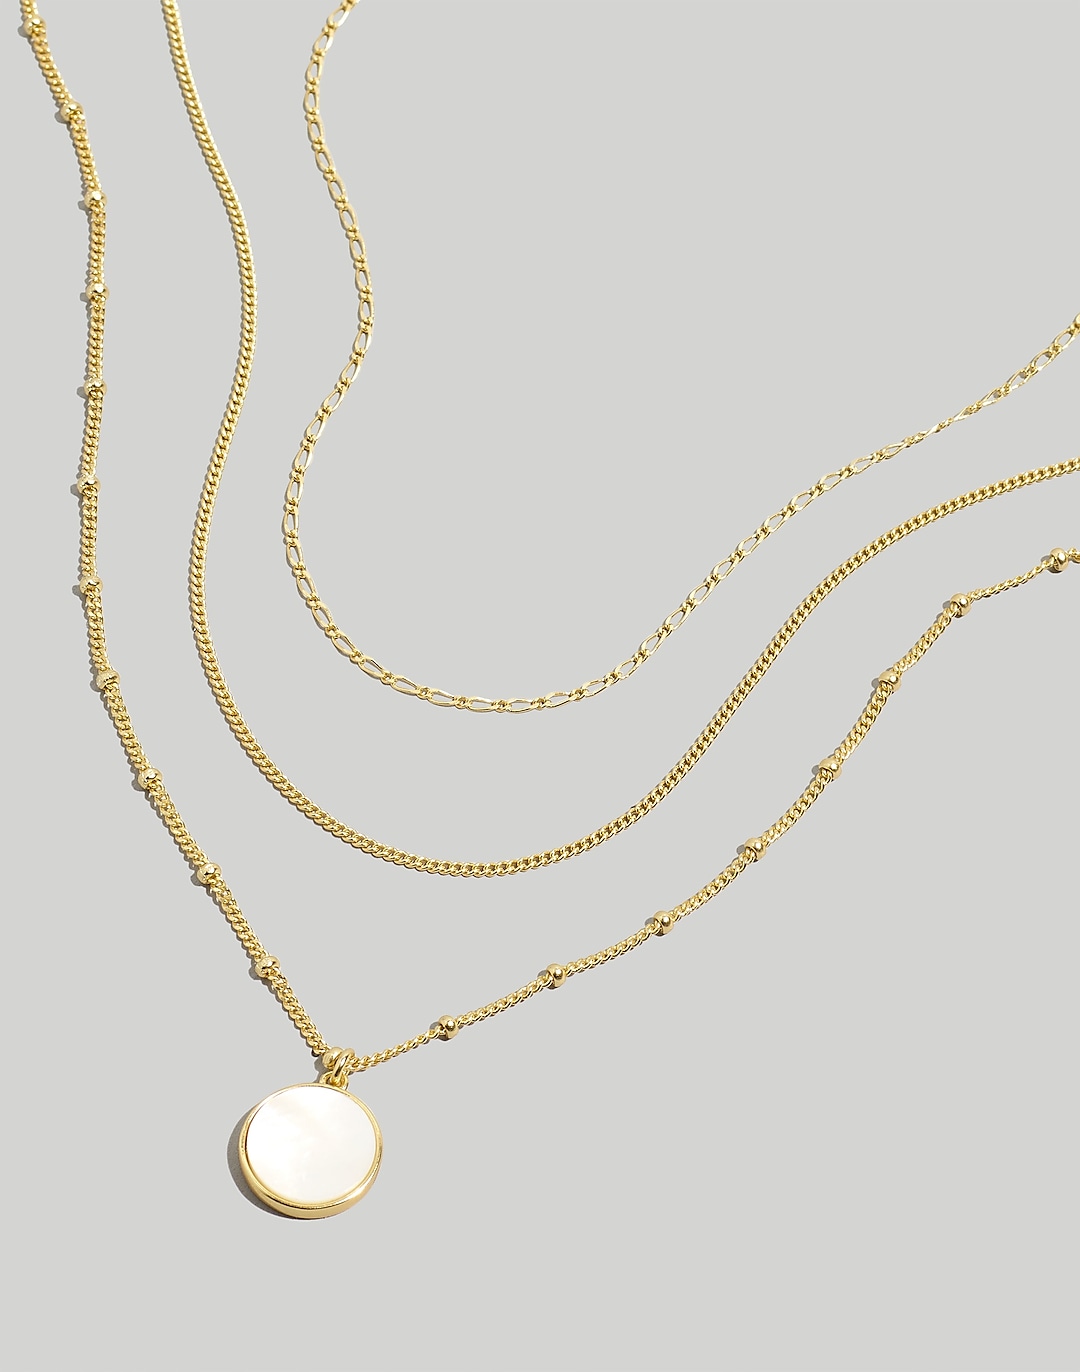 Madewell Three-Pack Mother of Pearl Necklace Set in Vintage Gold - Size One S